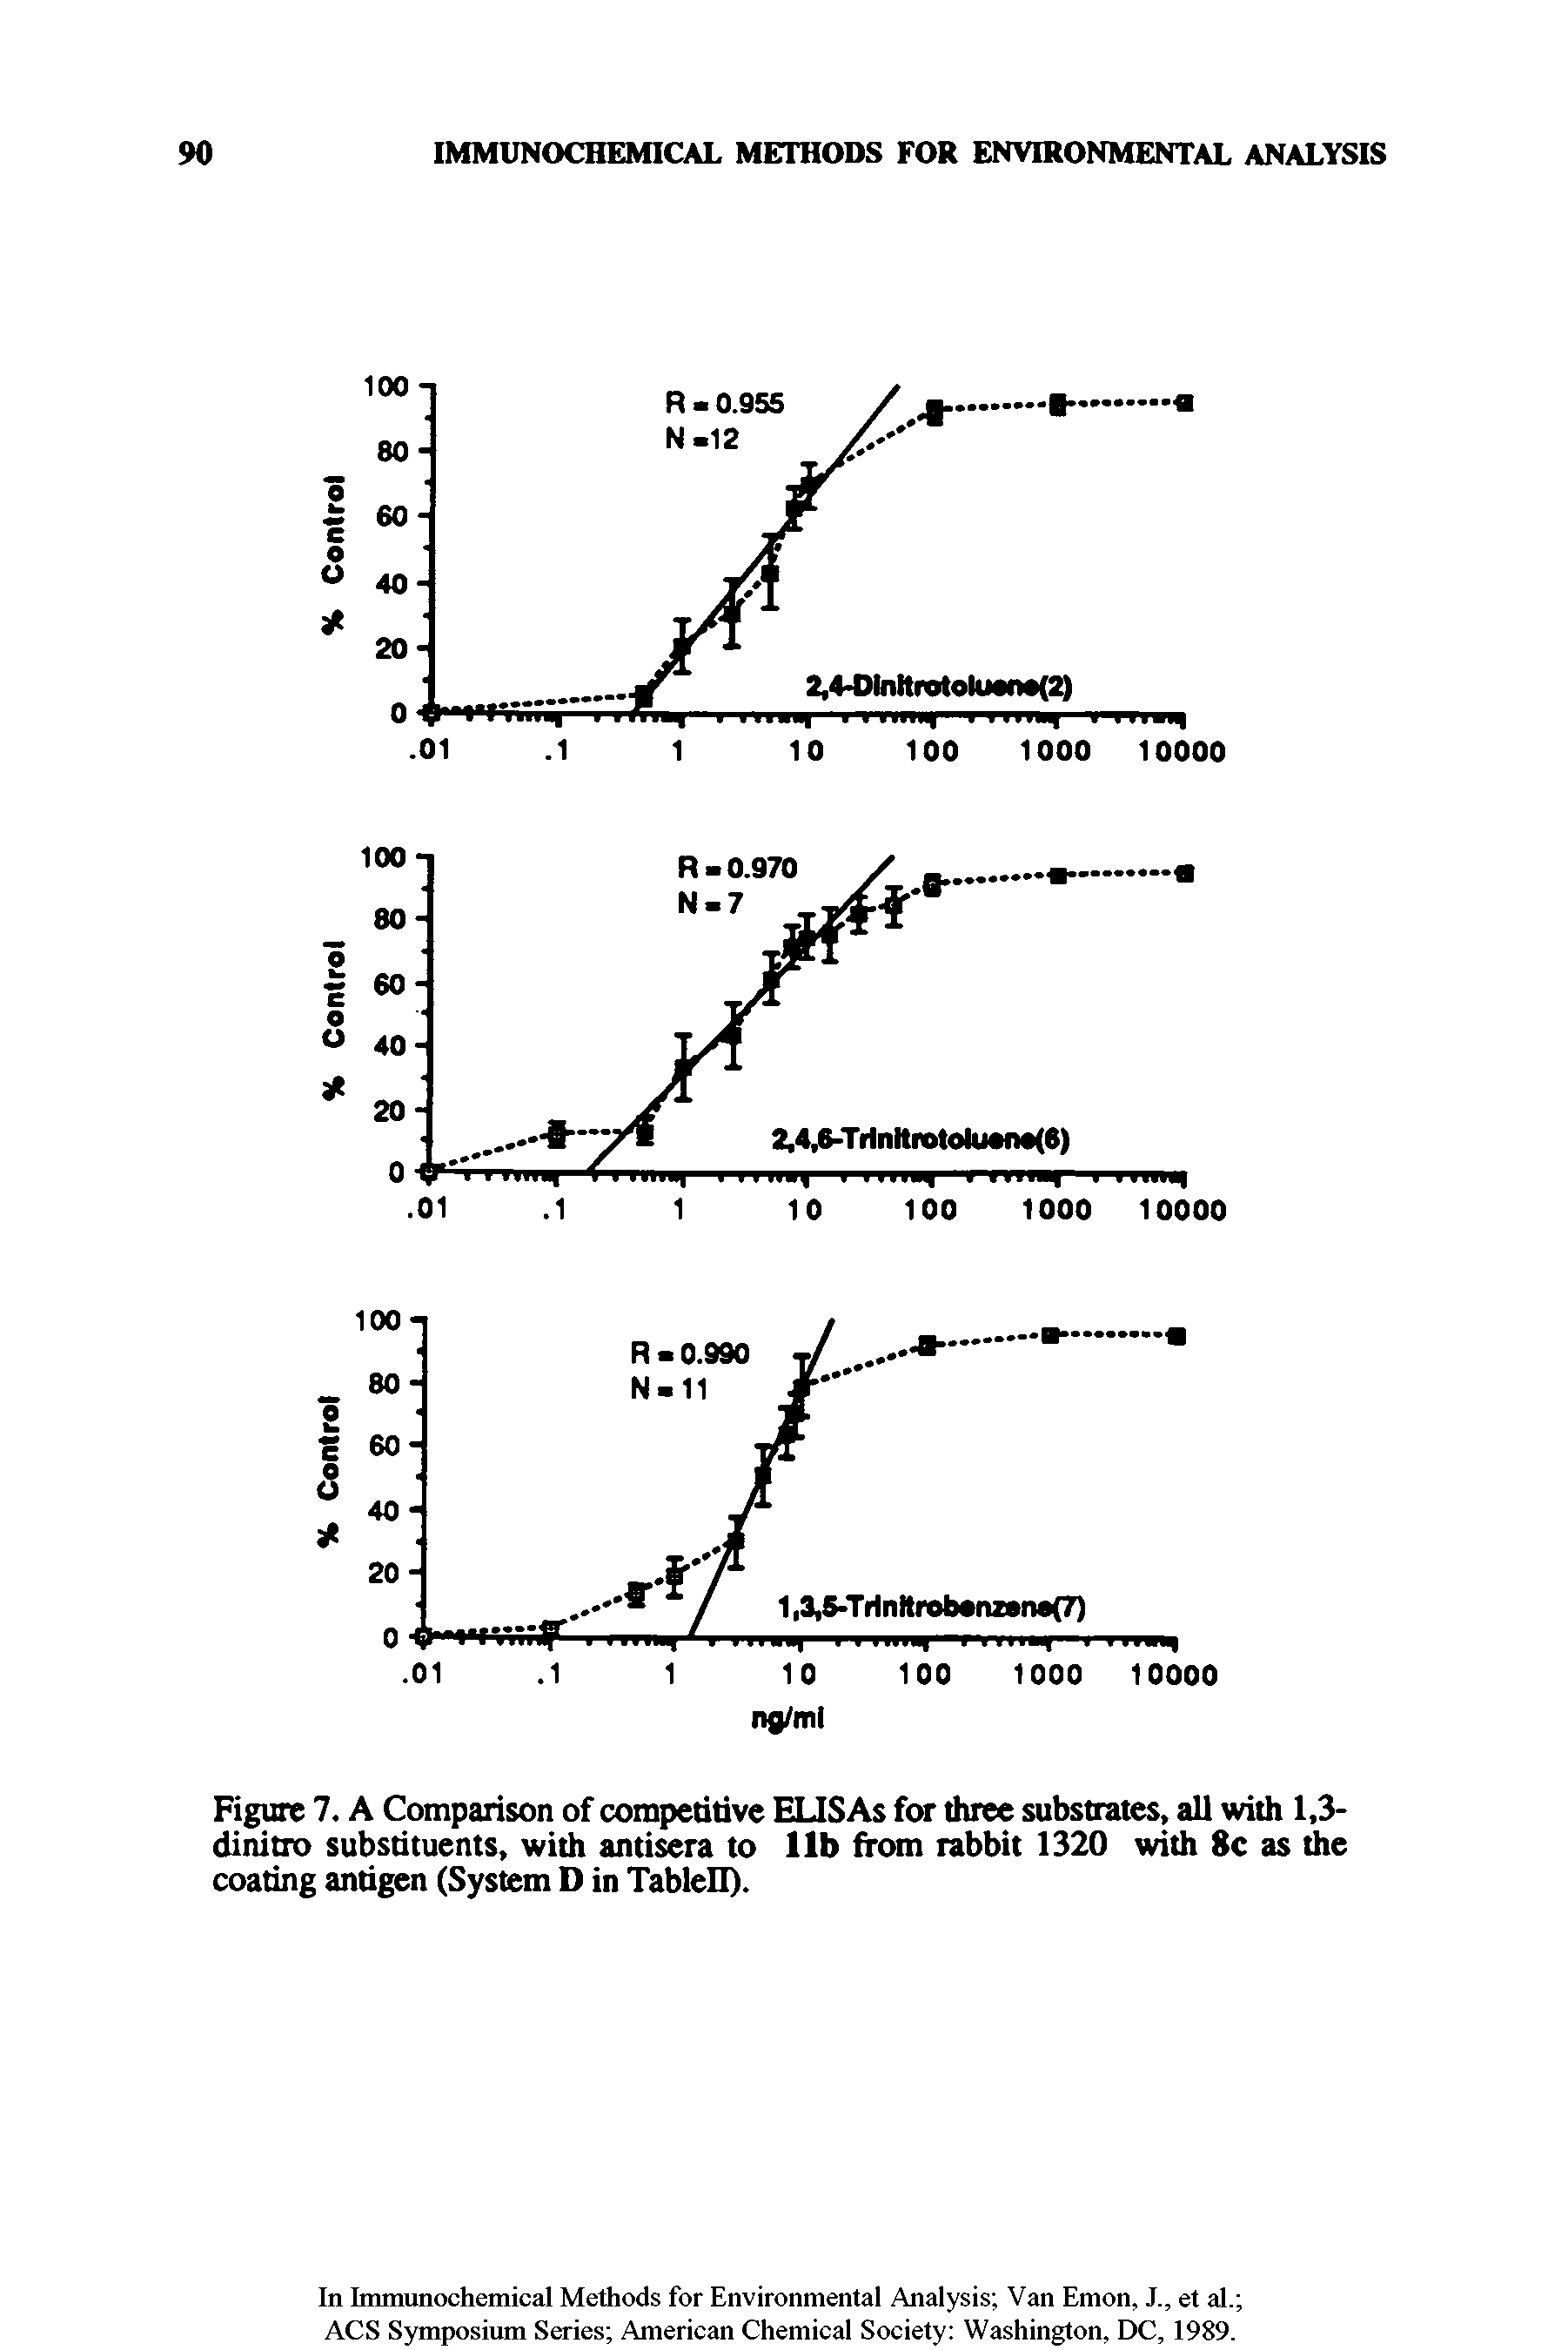 Figure 7. A Comparison of competitive ELISAs for three substrates, all with 1,3-dinitro substituents, with antisera to lib from rabbit 1320 with 8c as die coating antigen (System D in Tablell).